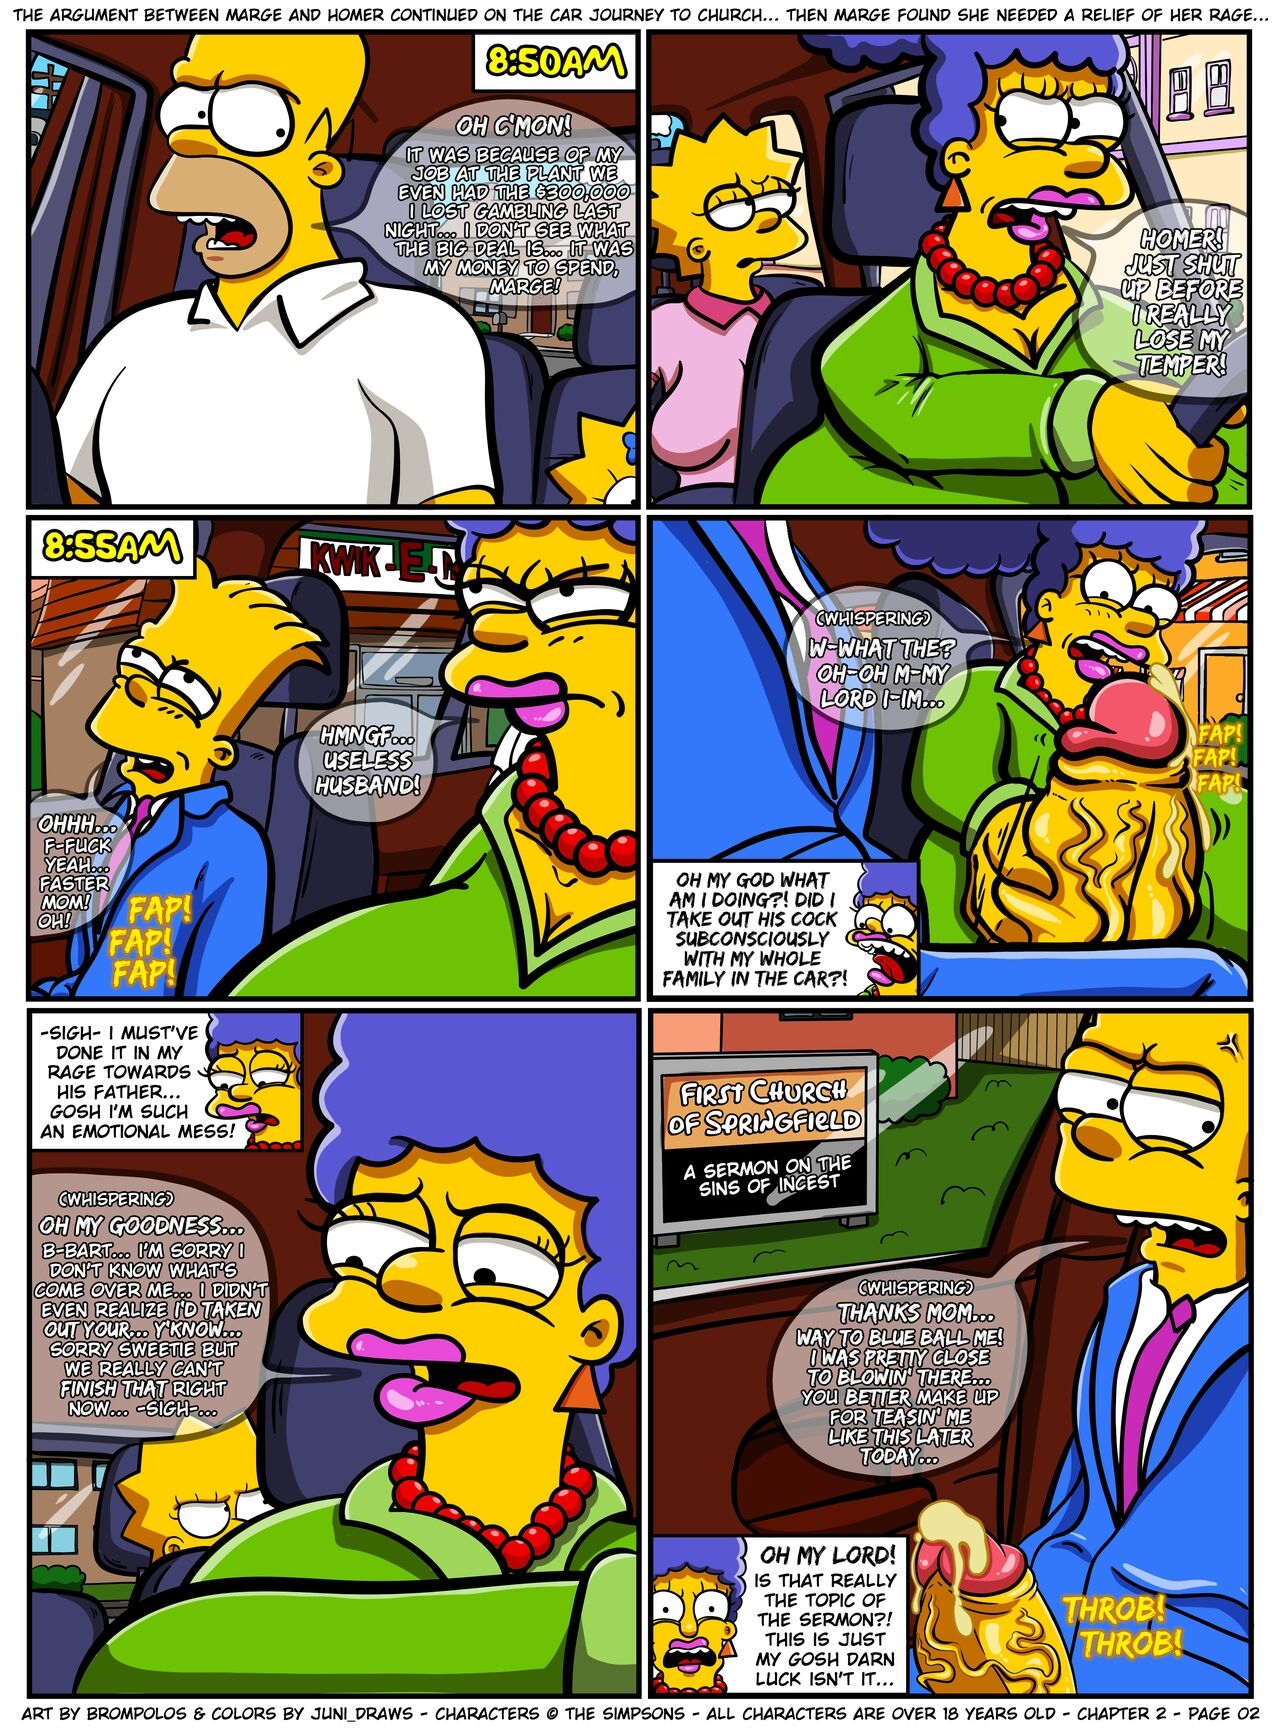 [Brompolos/Juni_Draws] The Sexensteins (Simpsons) [Ongoing] 50